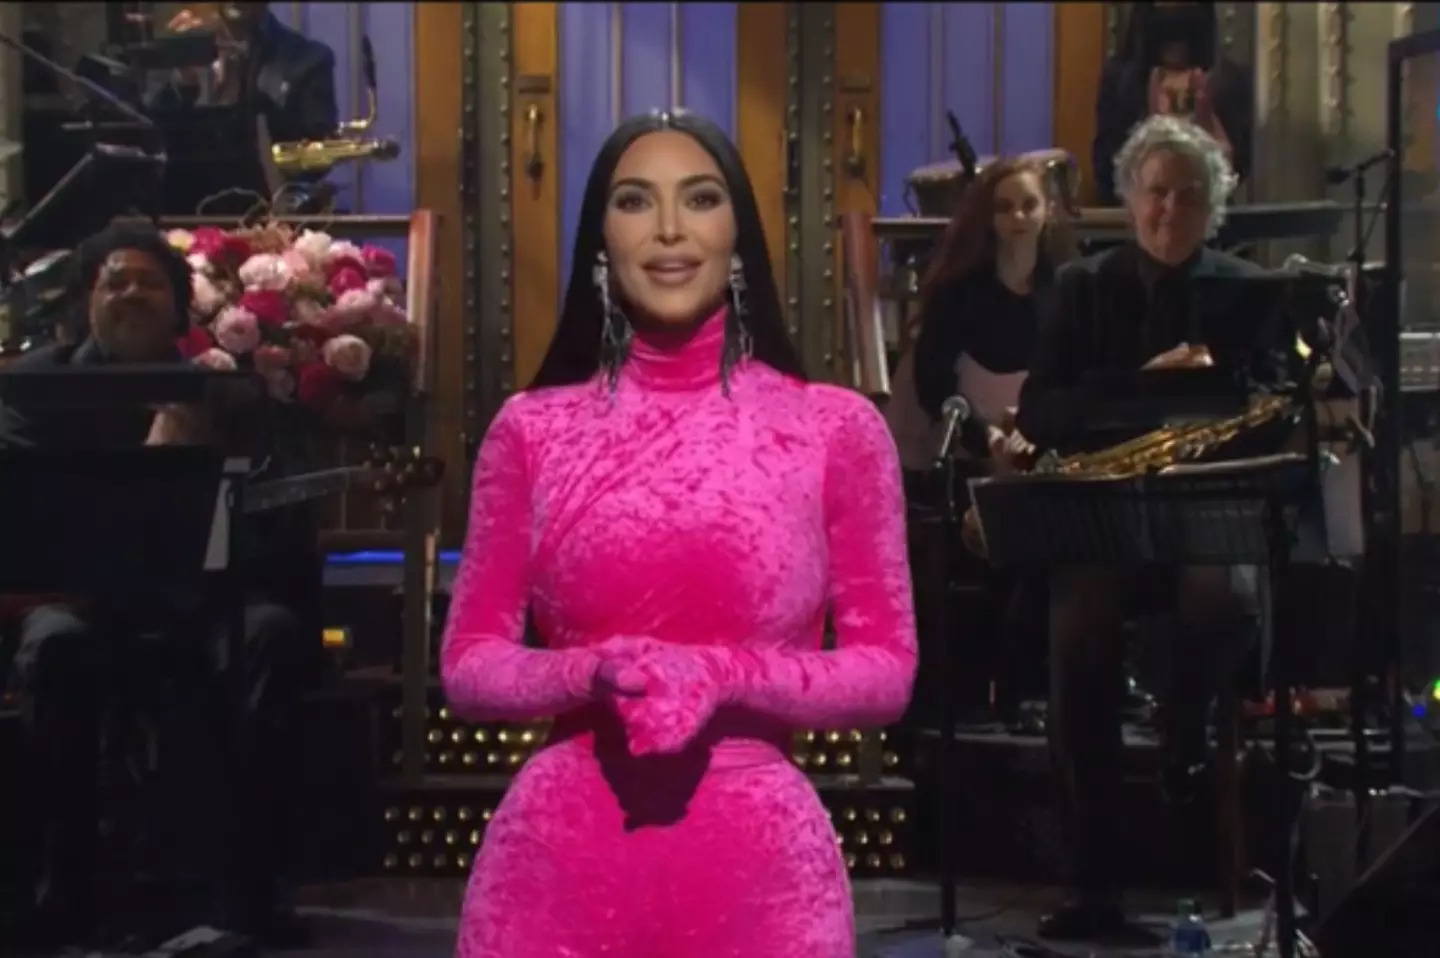 Kim previously appeared on SNL (